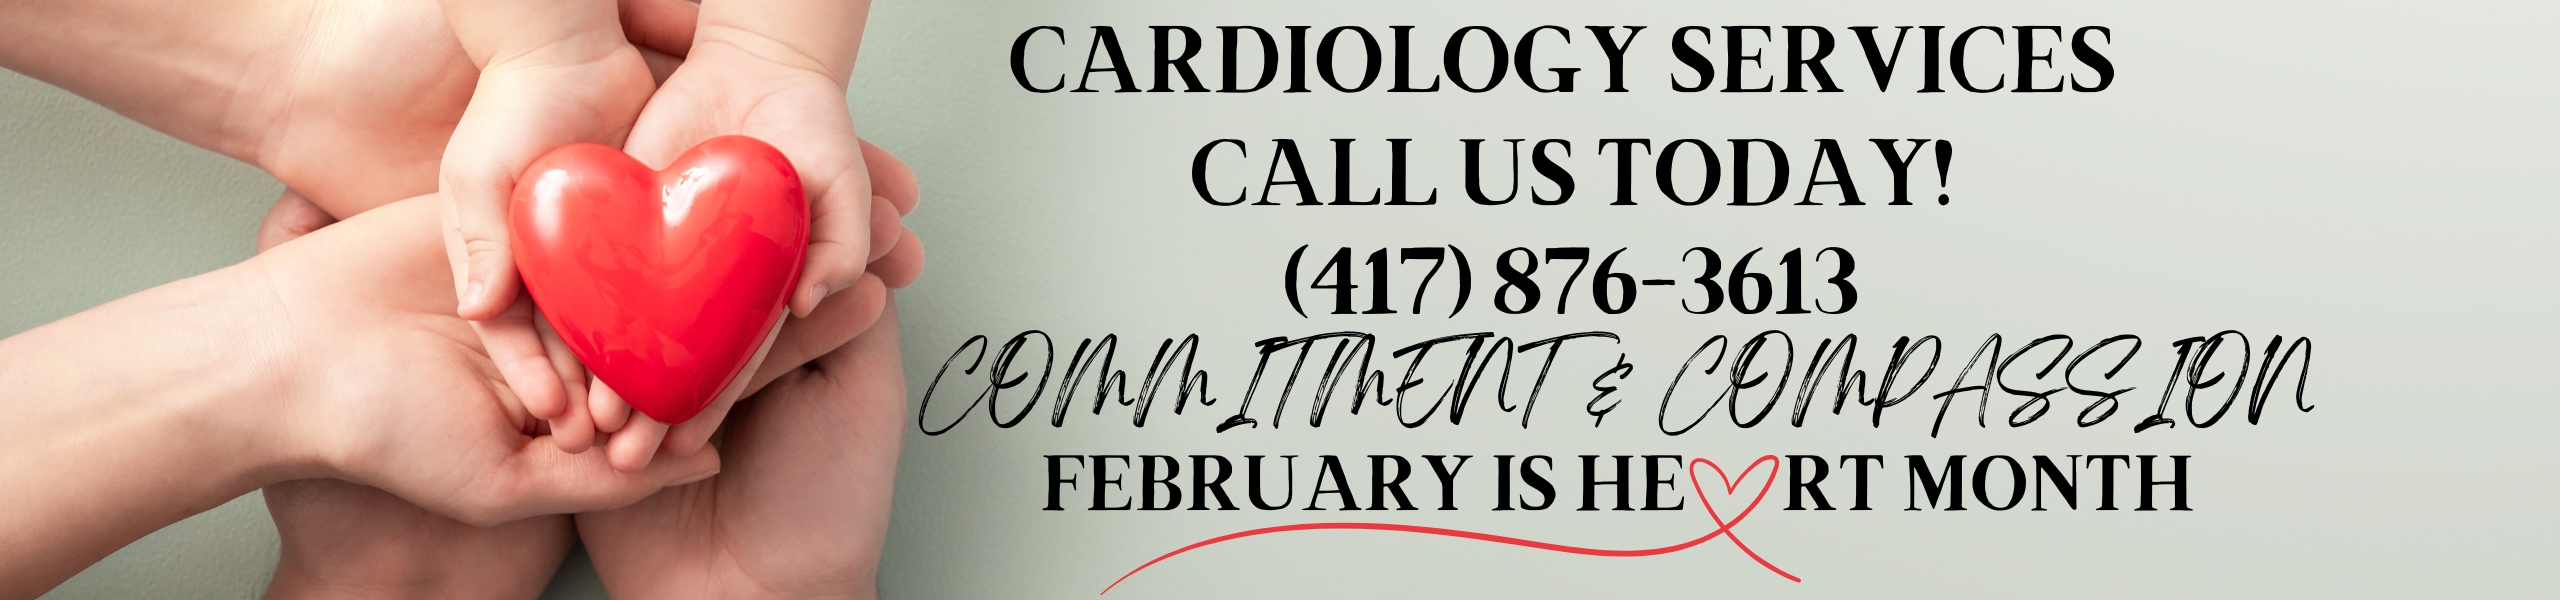 Heart month with Cardiology call today! (417) 876-3613